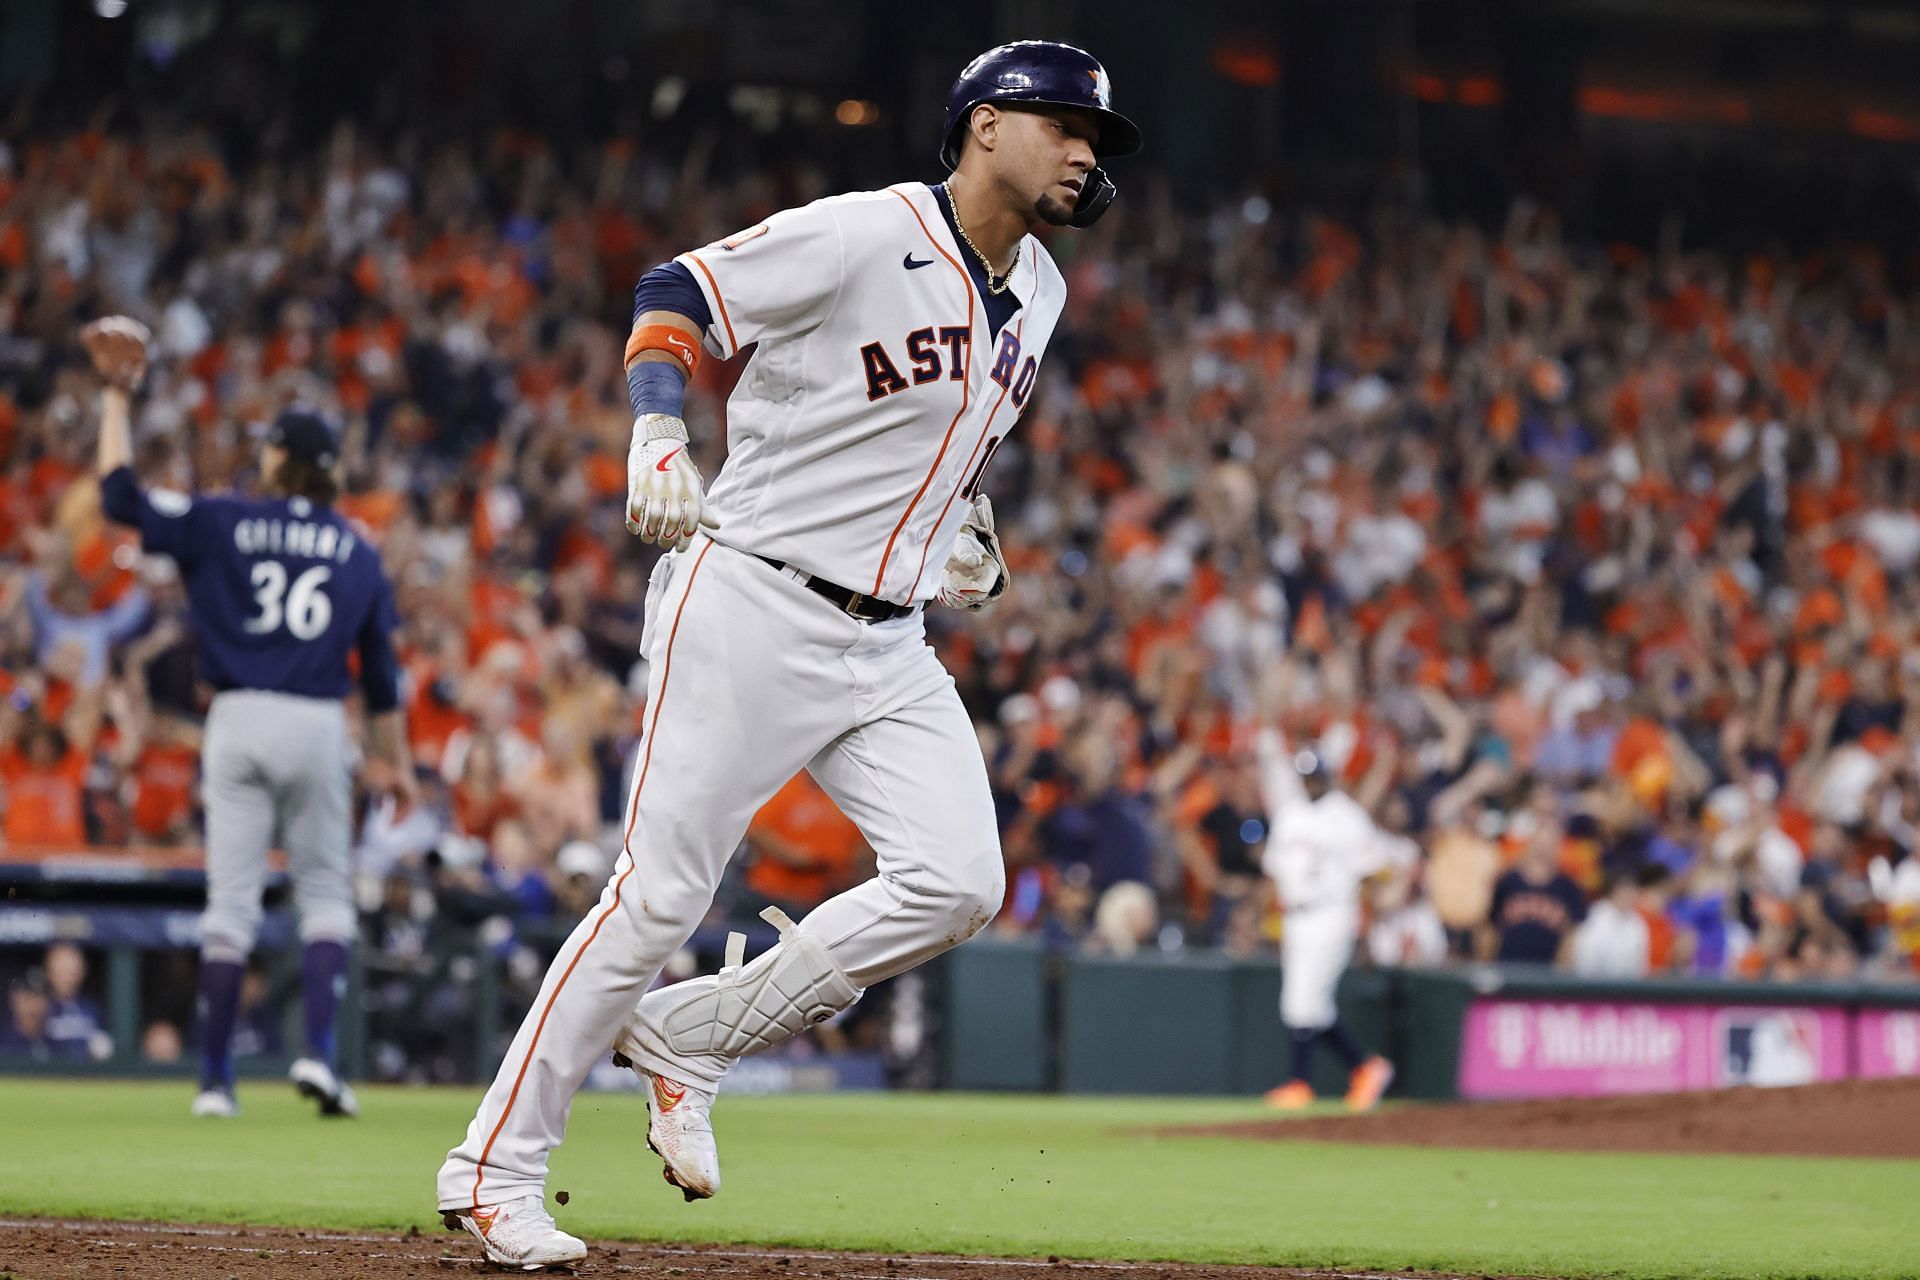 Yuli Gurriel of the Houston Astros jogs around the bases following his solo home run.